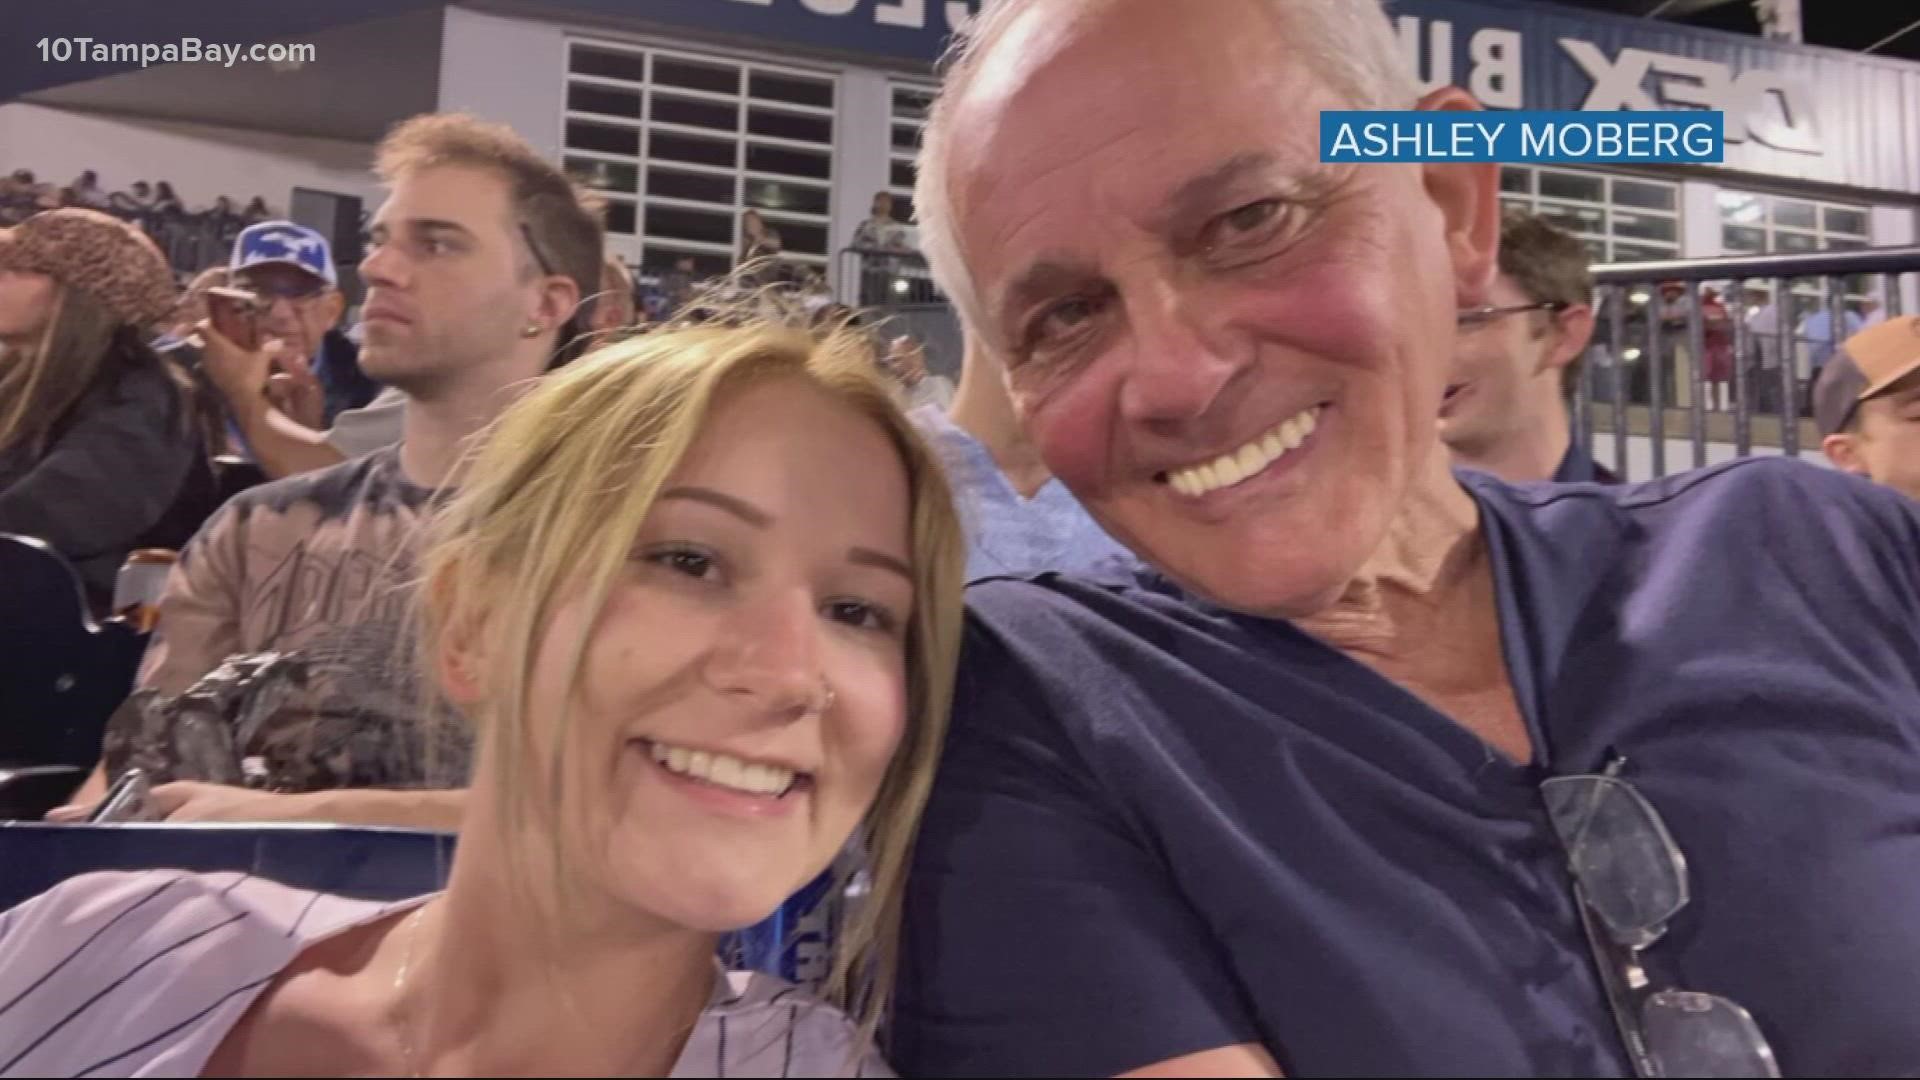 John and Ashley Moberg said they're thankful for the people who helped them after lightning struck the two, Tampa Police said.